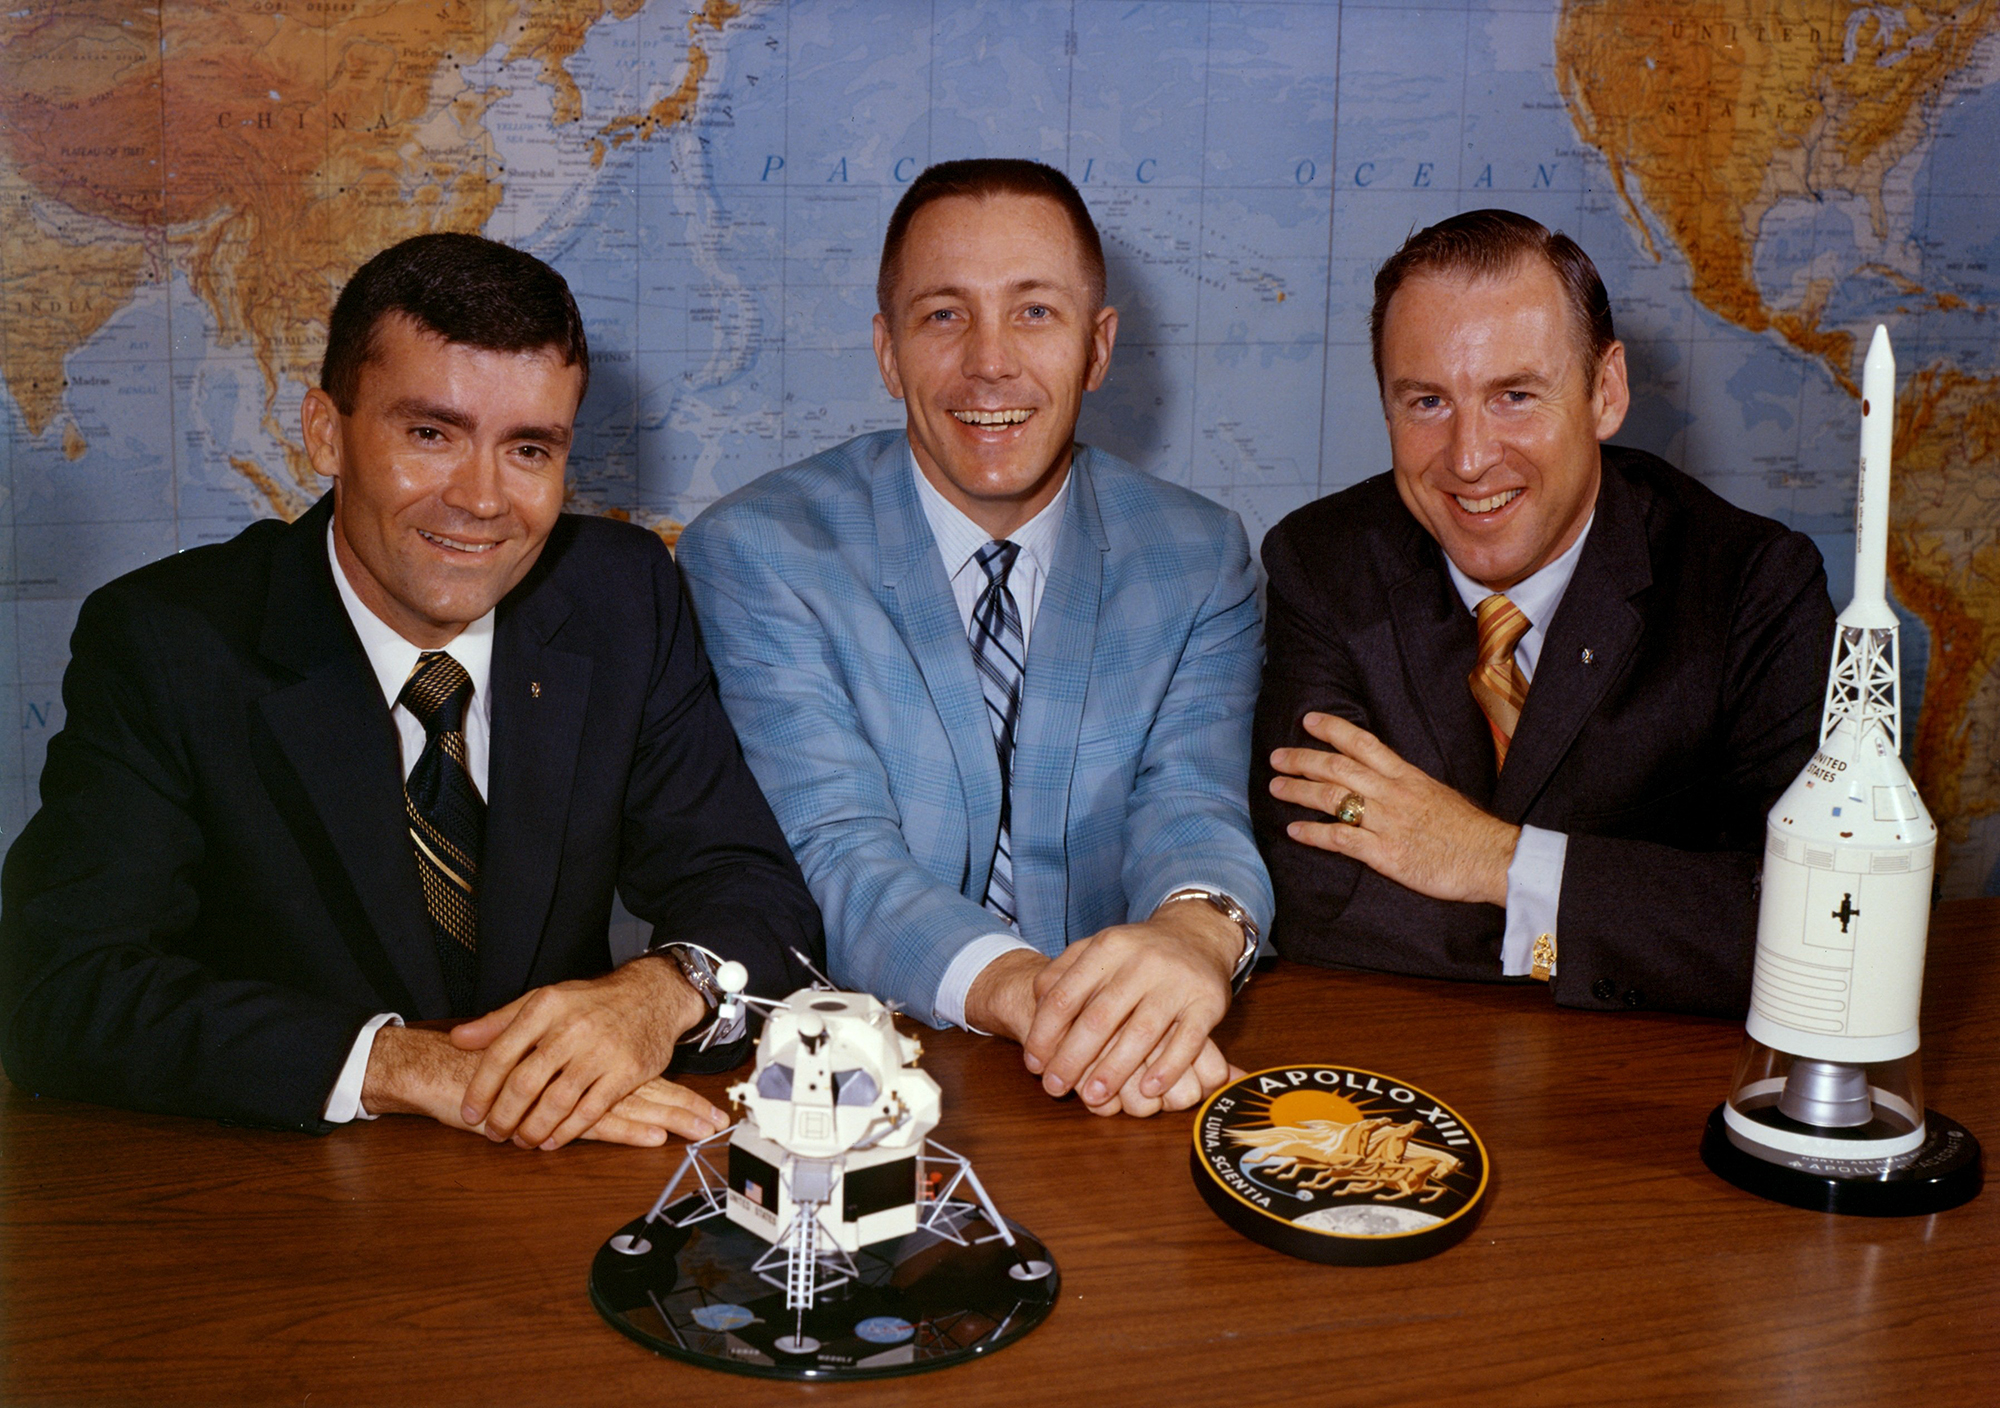 fred-haise-jack-swigert-and-jim-lovell-pose-on-the-day-before-launc.jpg